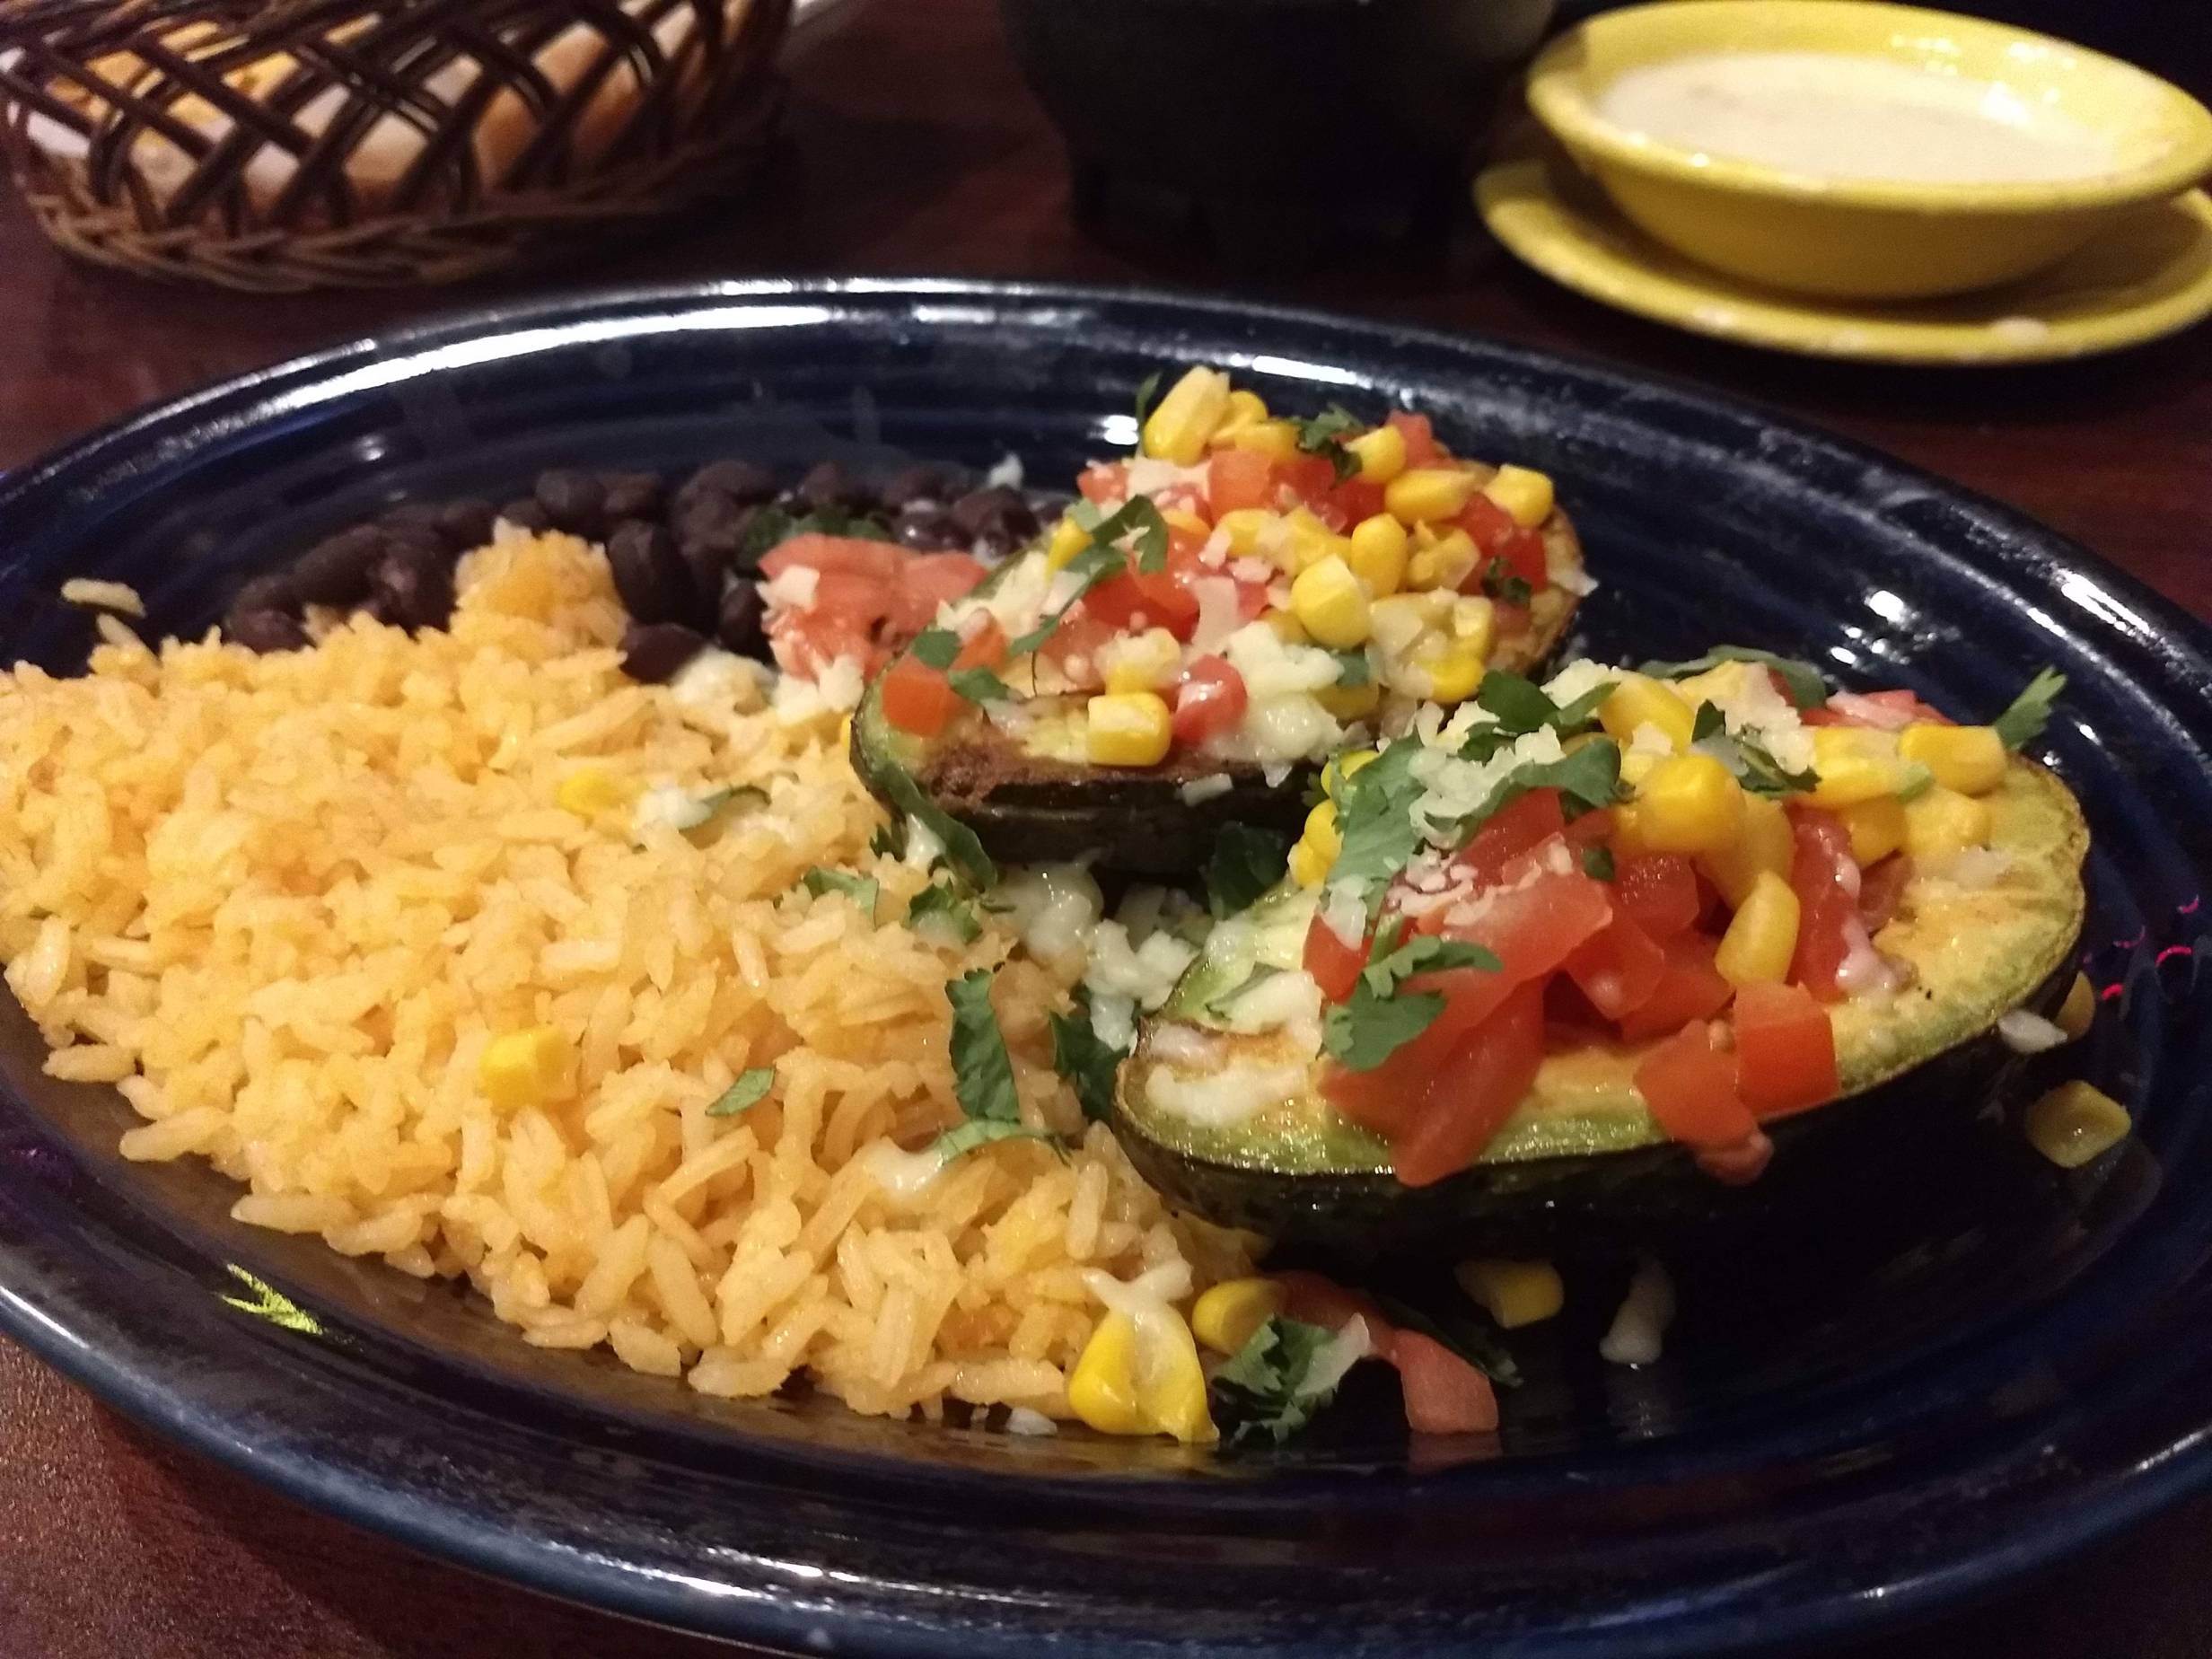 Stuffed Avocadoes from El Toro. One whole avocado cut in half and filled in the middle with black beans, topped with cheese and a fresh corn and tomatoe salsa. To the left is a side of riceand black beans. Served on a blue plate. Photo by Adam Rahn. 